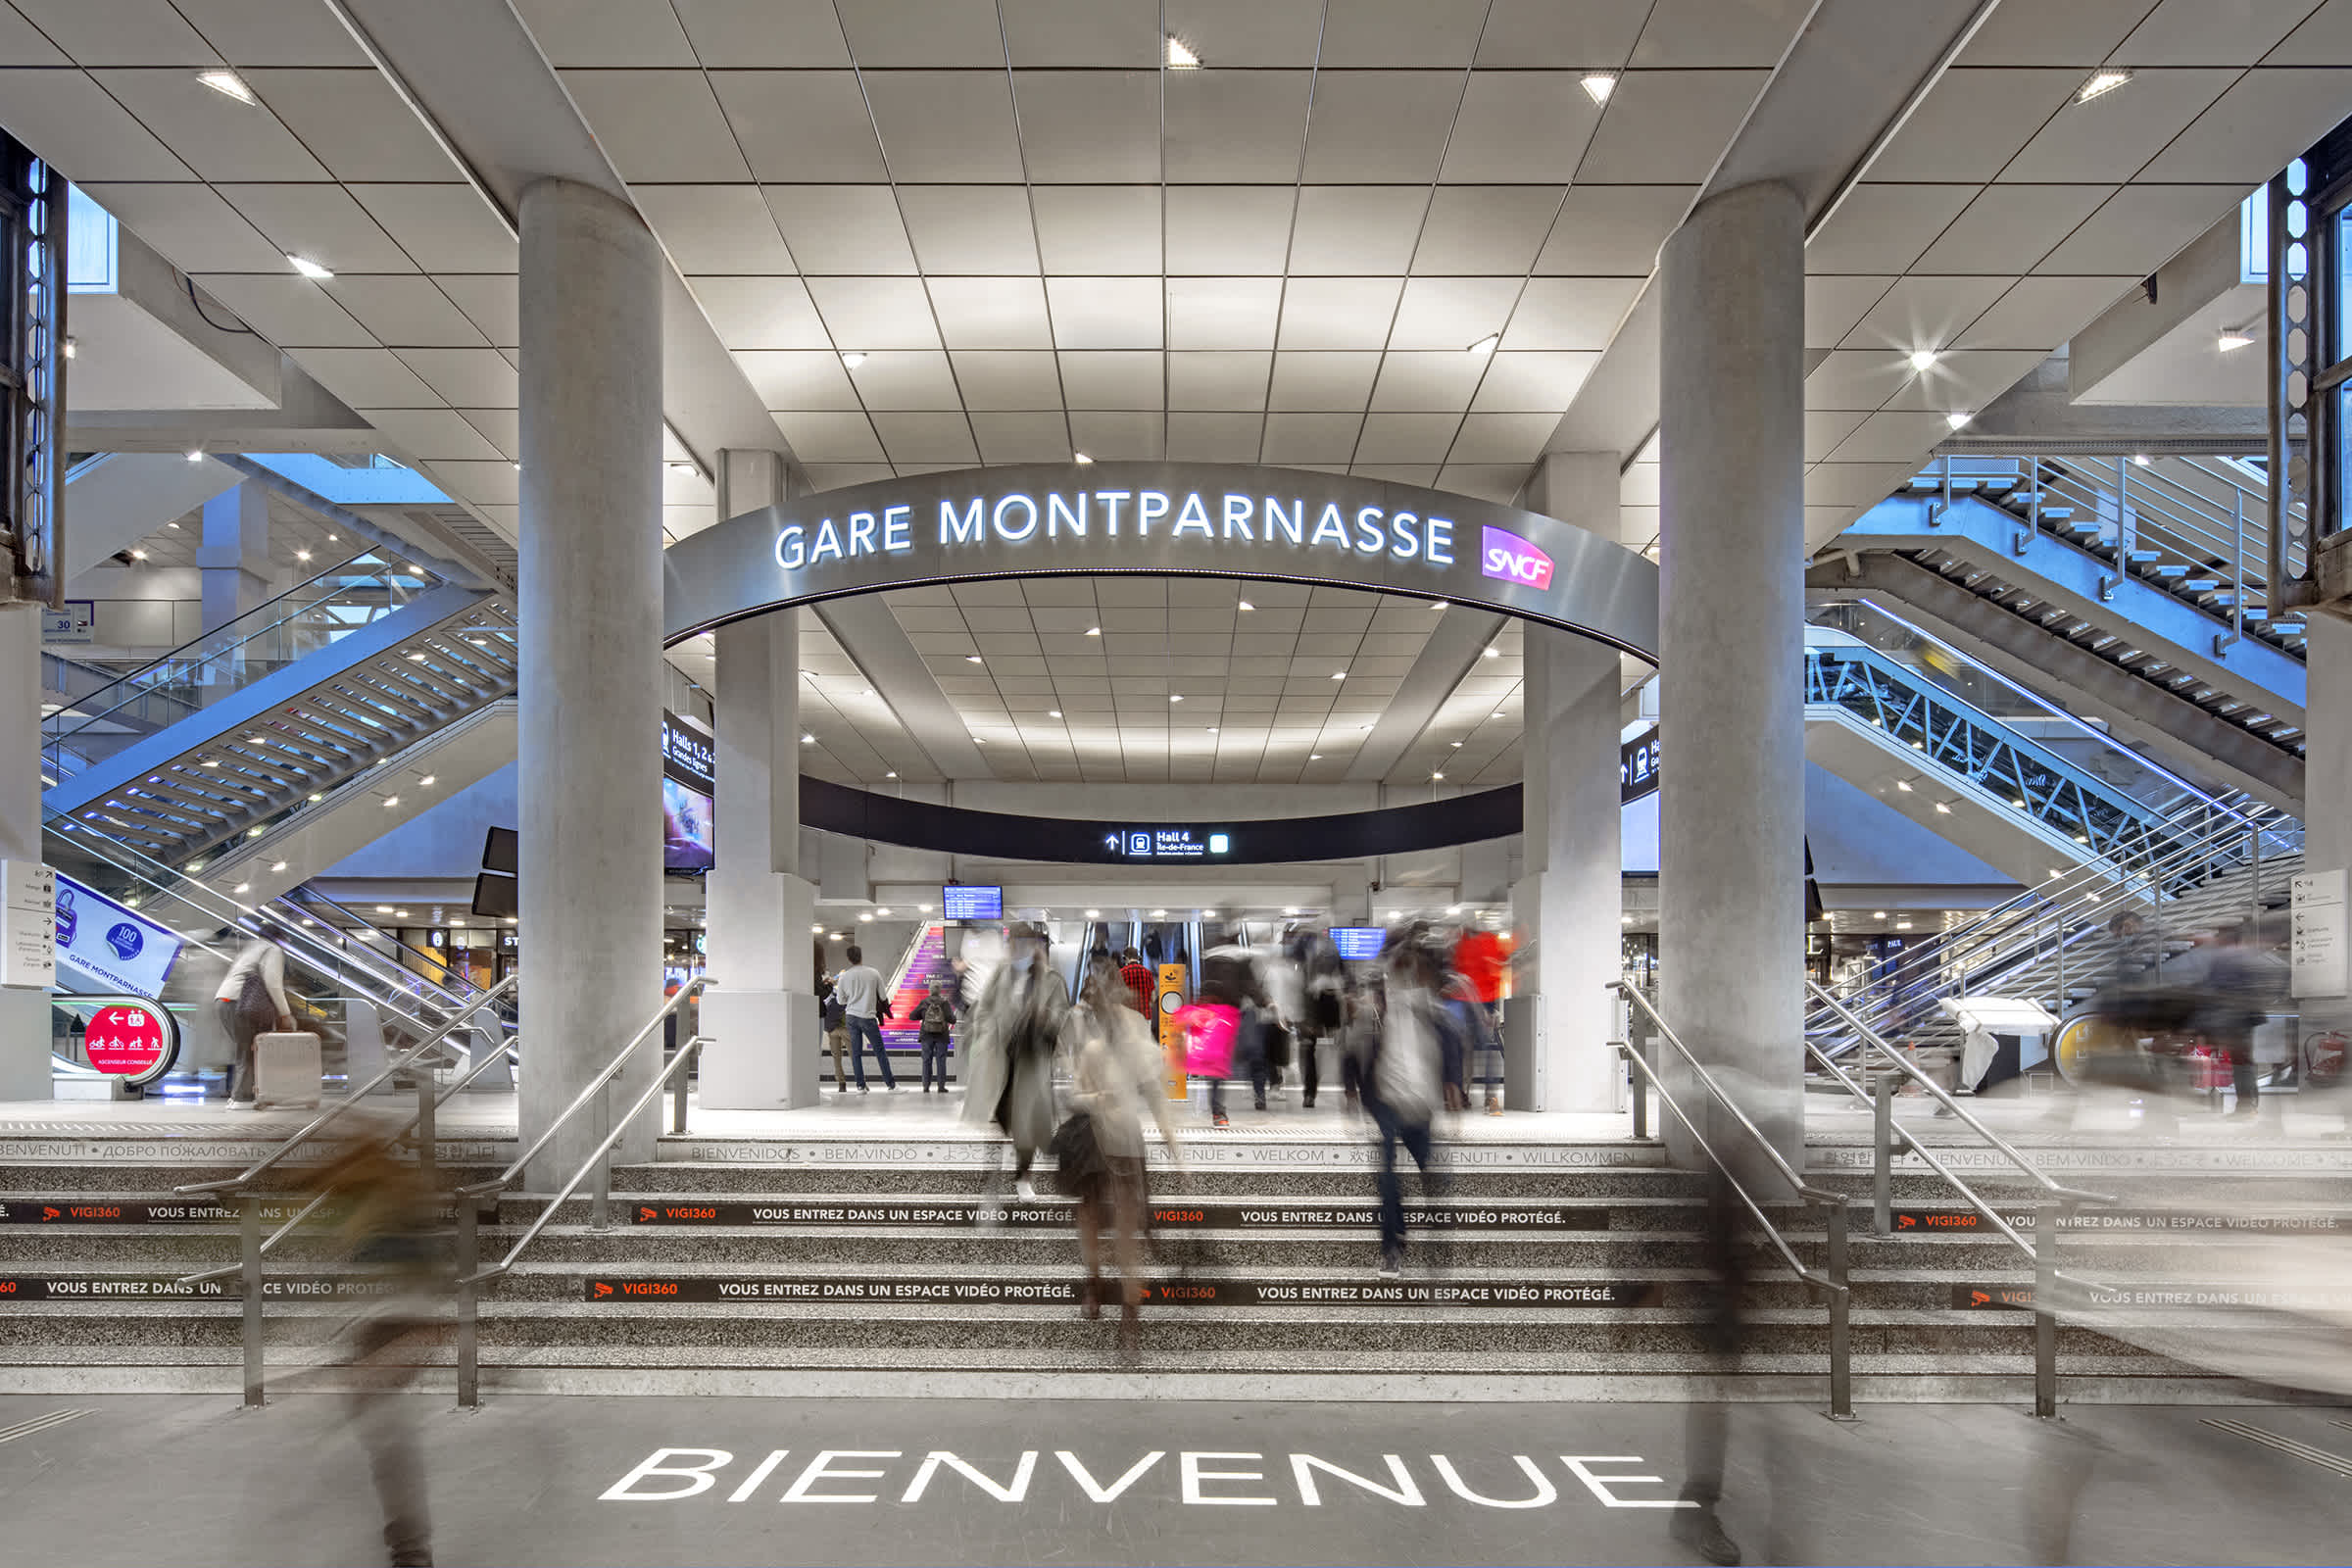 Montparnasse station in Paris: how to get to other stations and